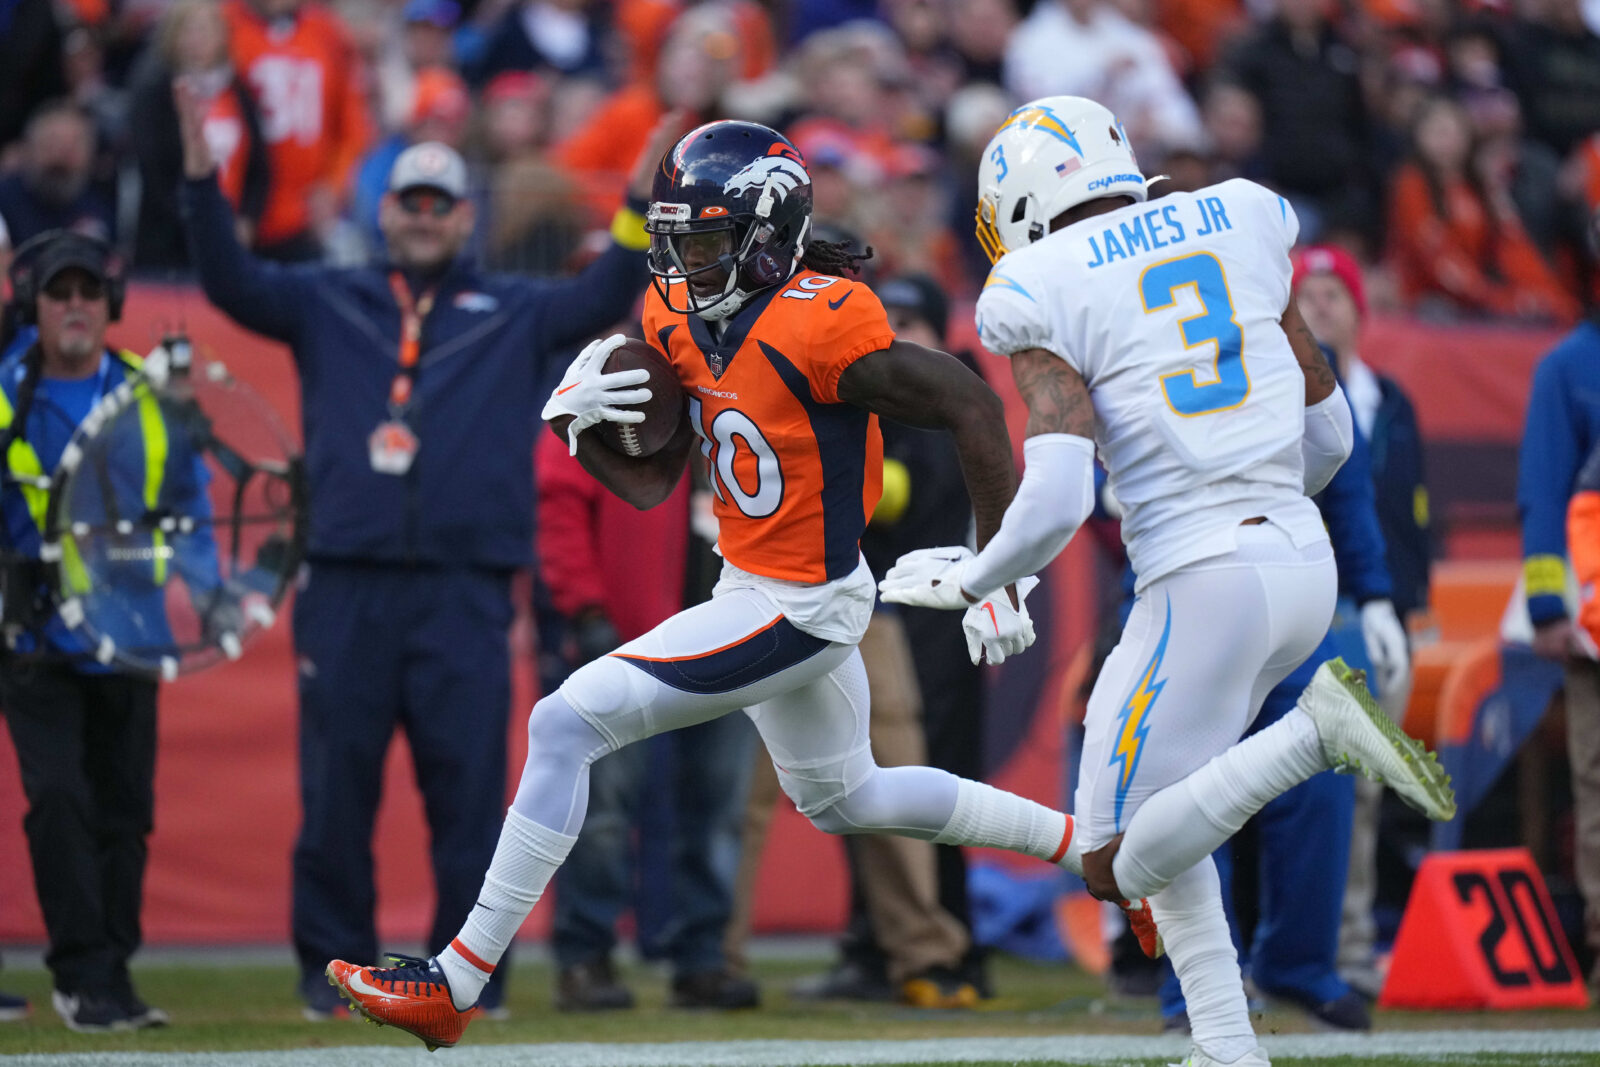 Former Tennessee Vols WR predicted to make Broncos' 53-man roster